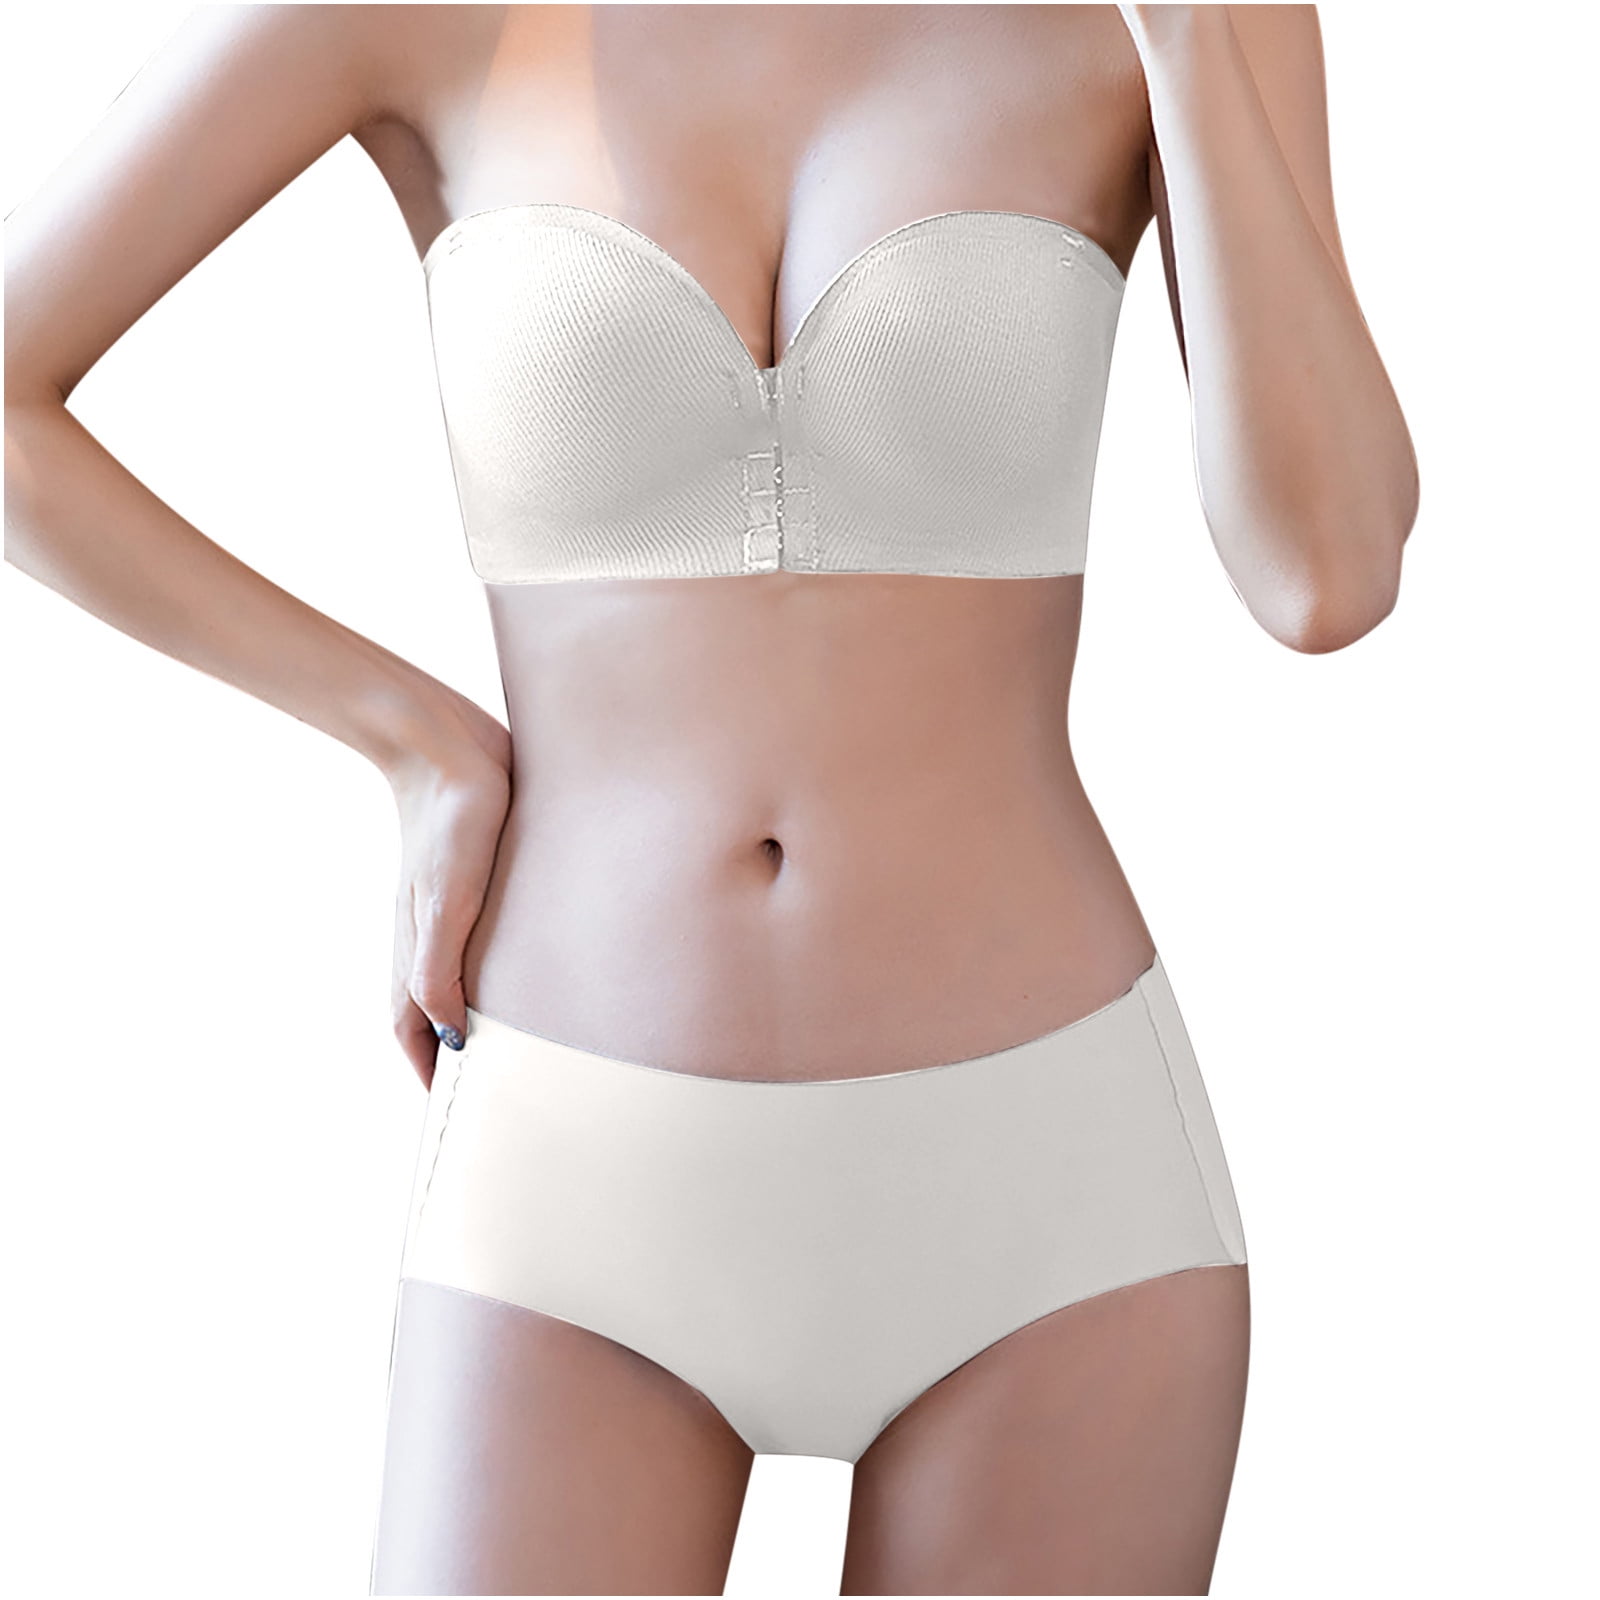 Stamzod Strapless Bras For Women Non-slip Gathering Summer Collection Pair  Breast Anti-sagging Small Chest Traceless No Underwire Front Buckle Bra Set  